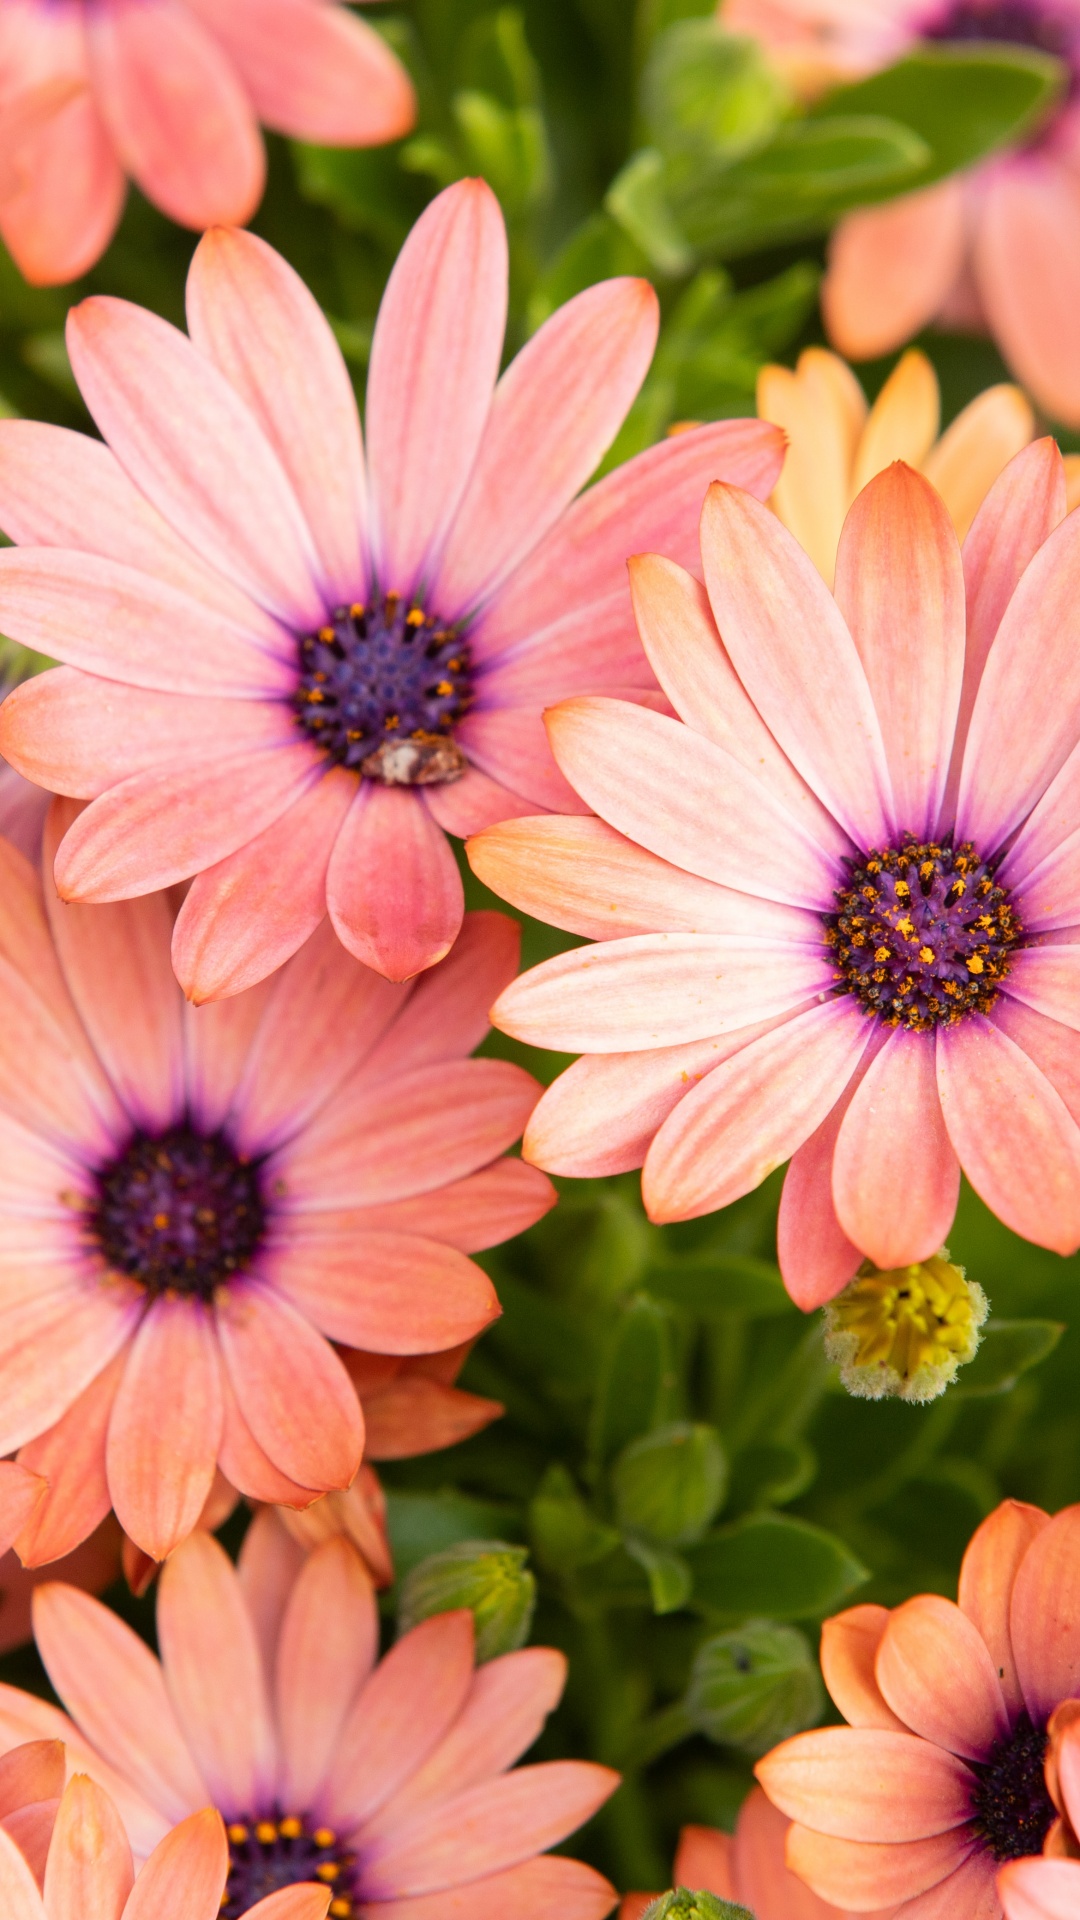 Pink Daisies Wallpaper 4K, Floral Background, Blossom, Bloom, Spring ...